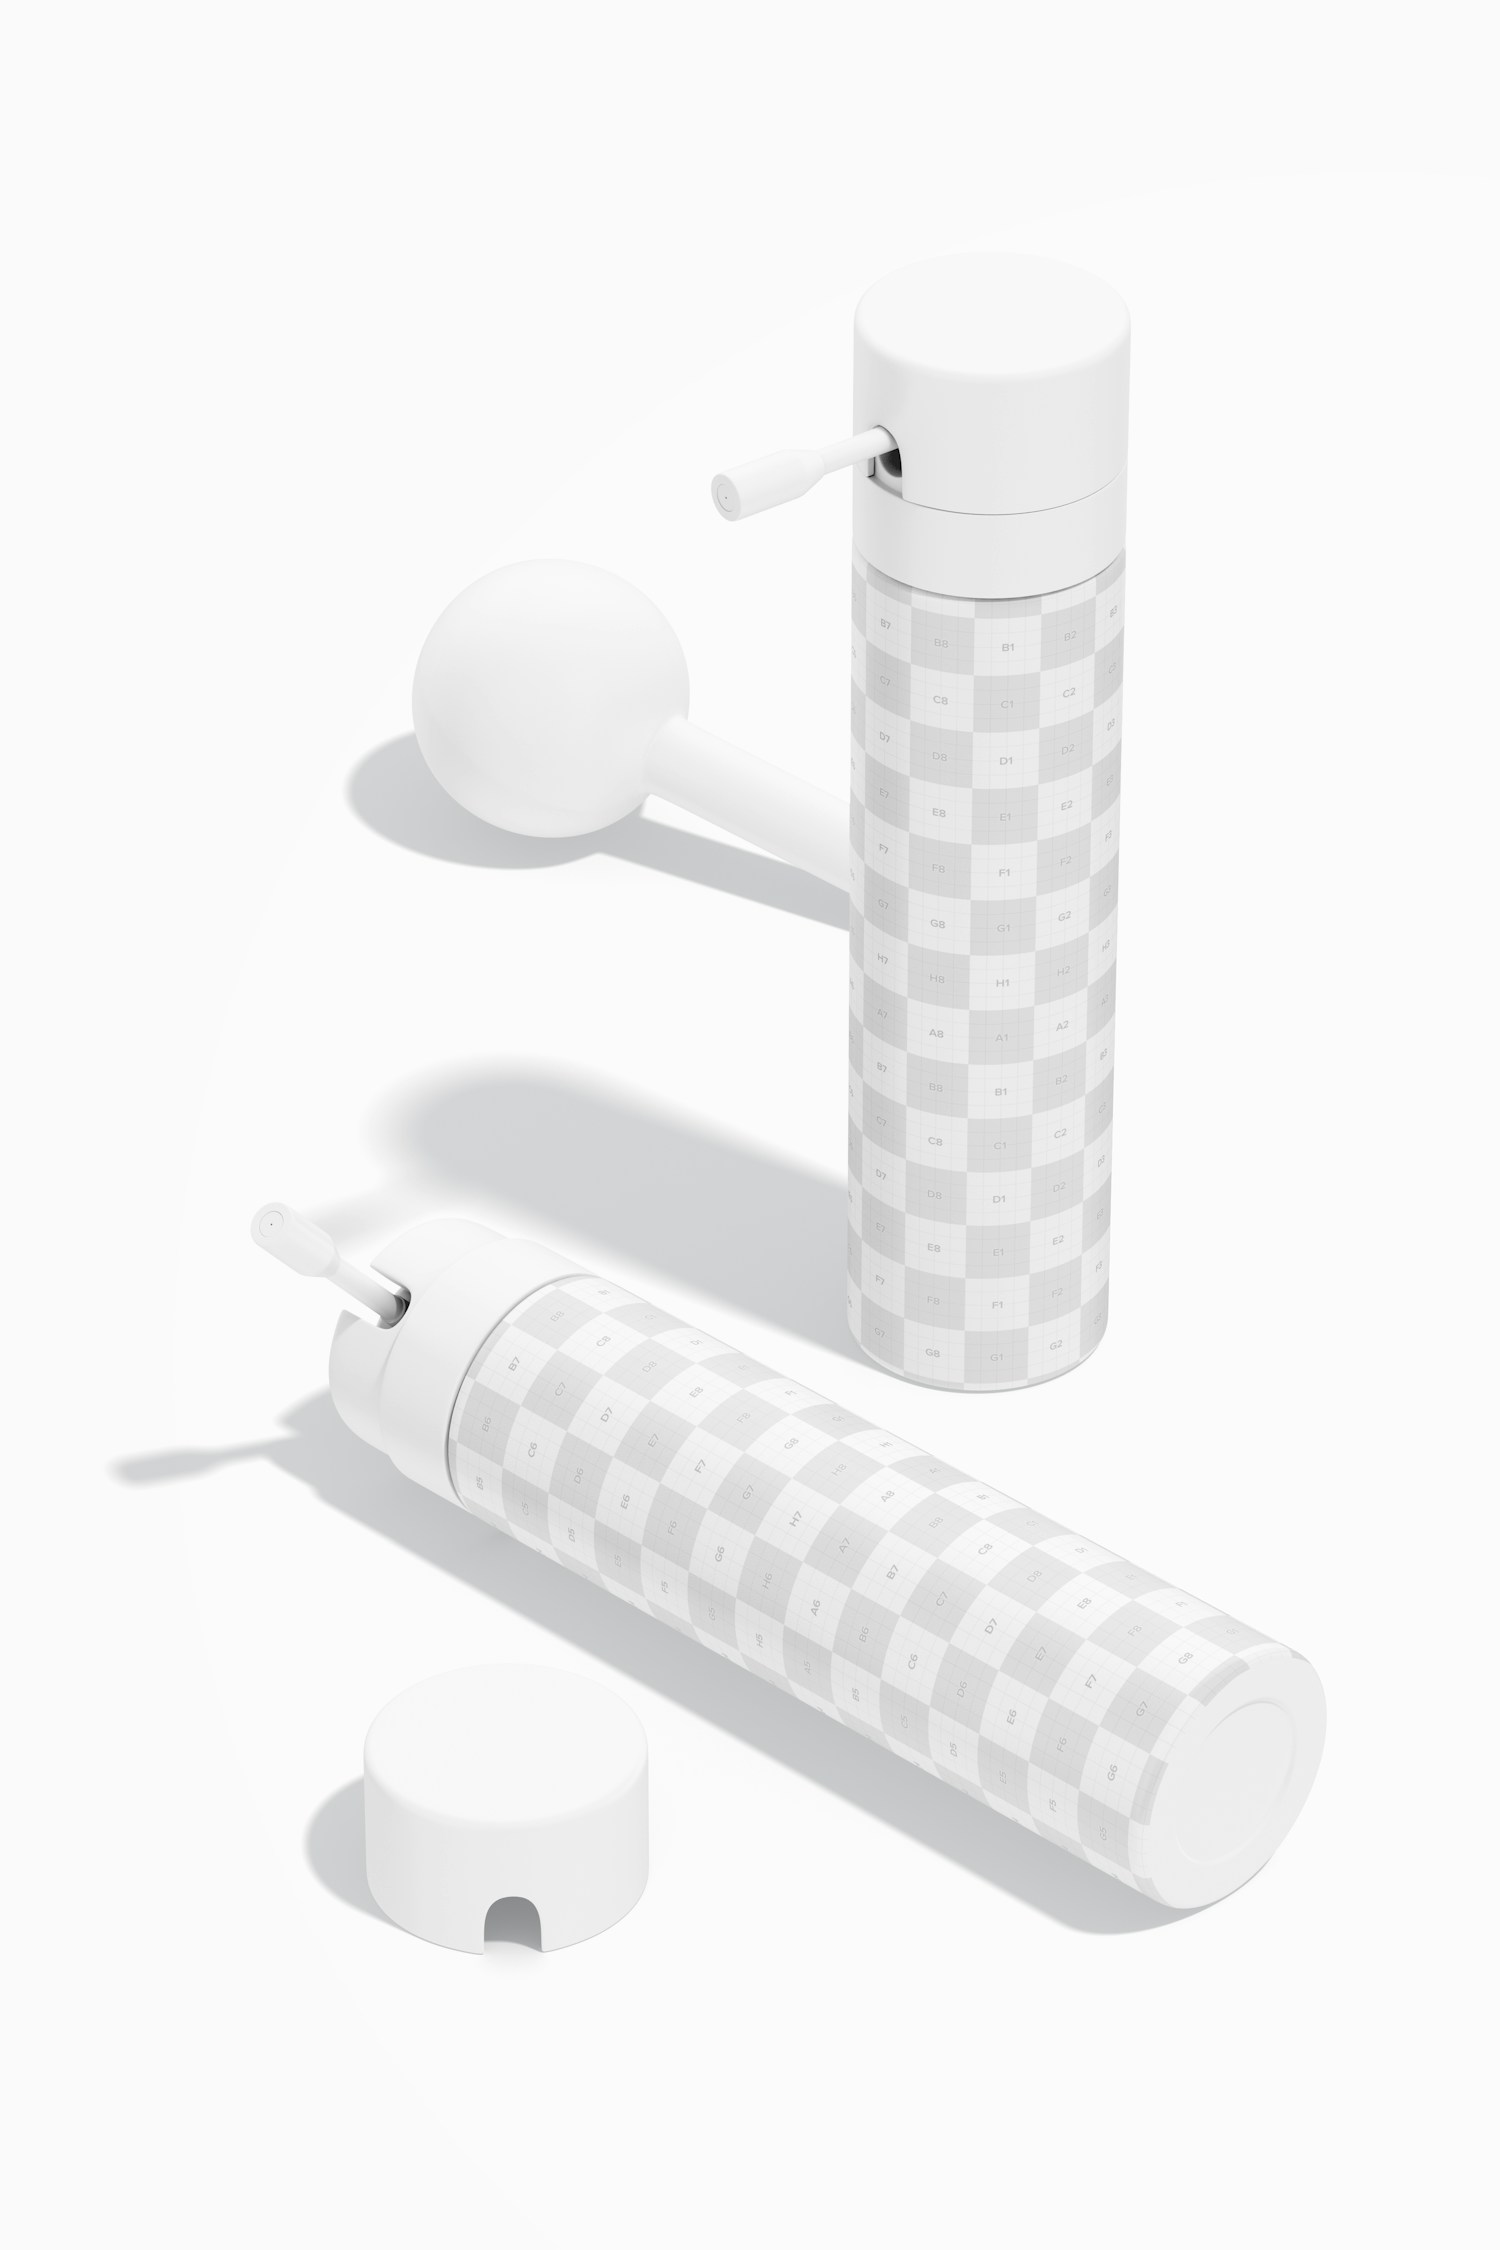 Large Facial Toner Bottles Mockup, Standing and Dropped